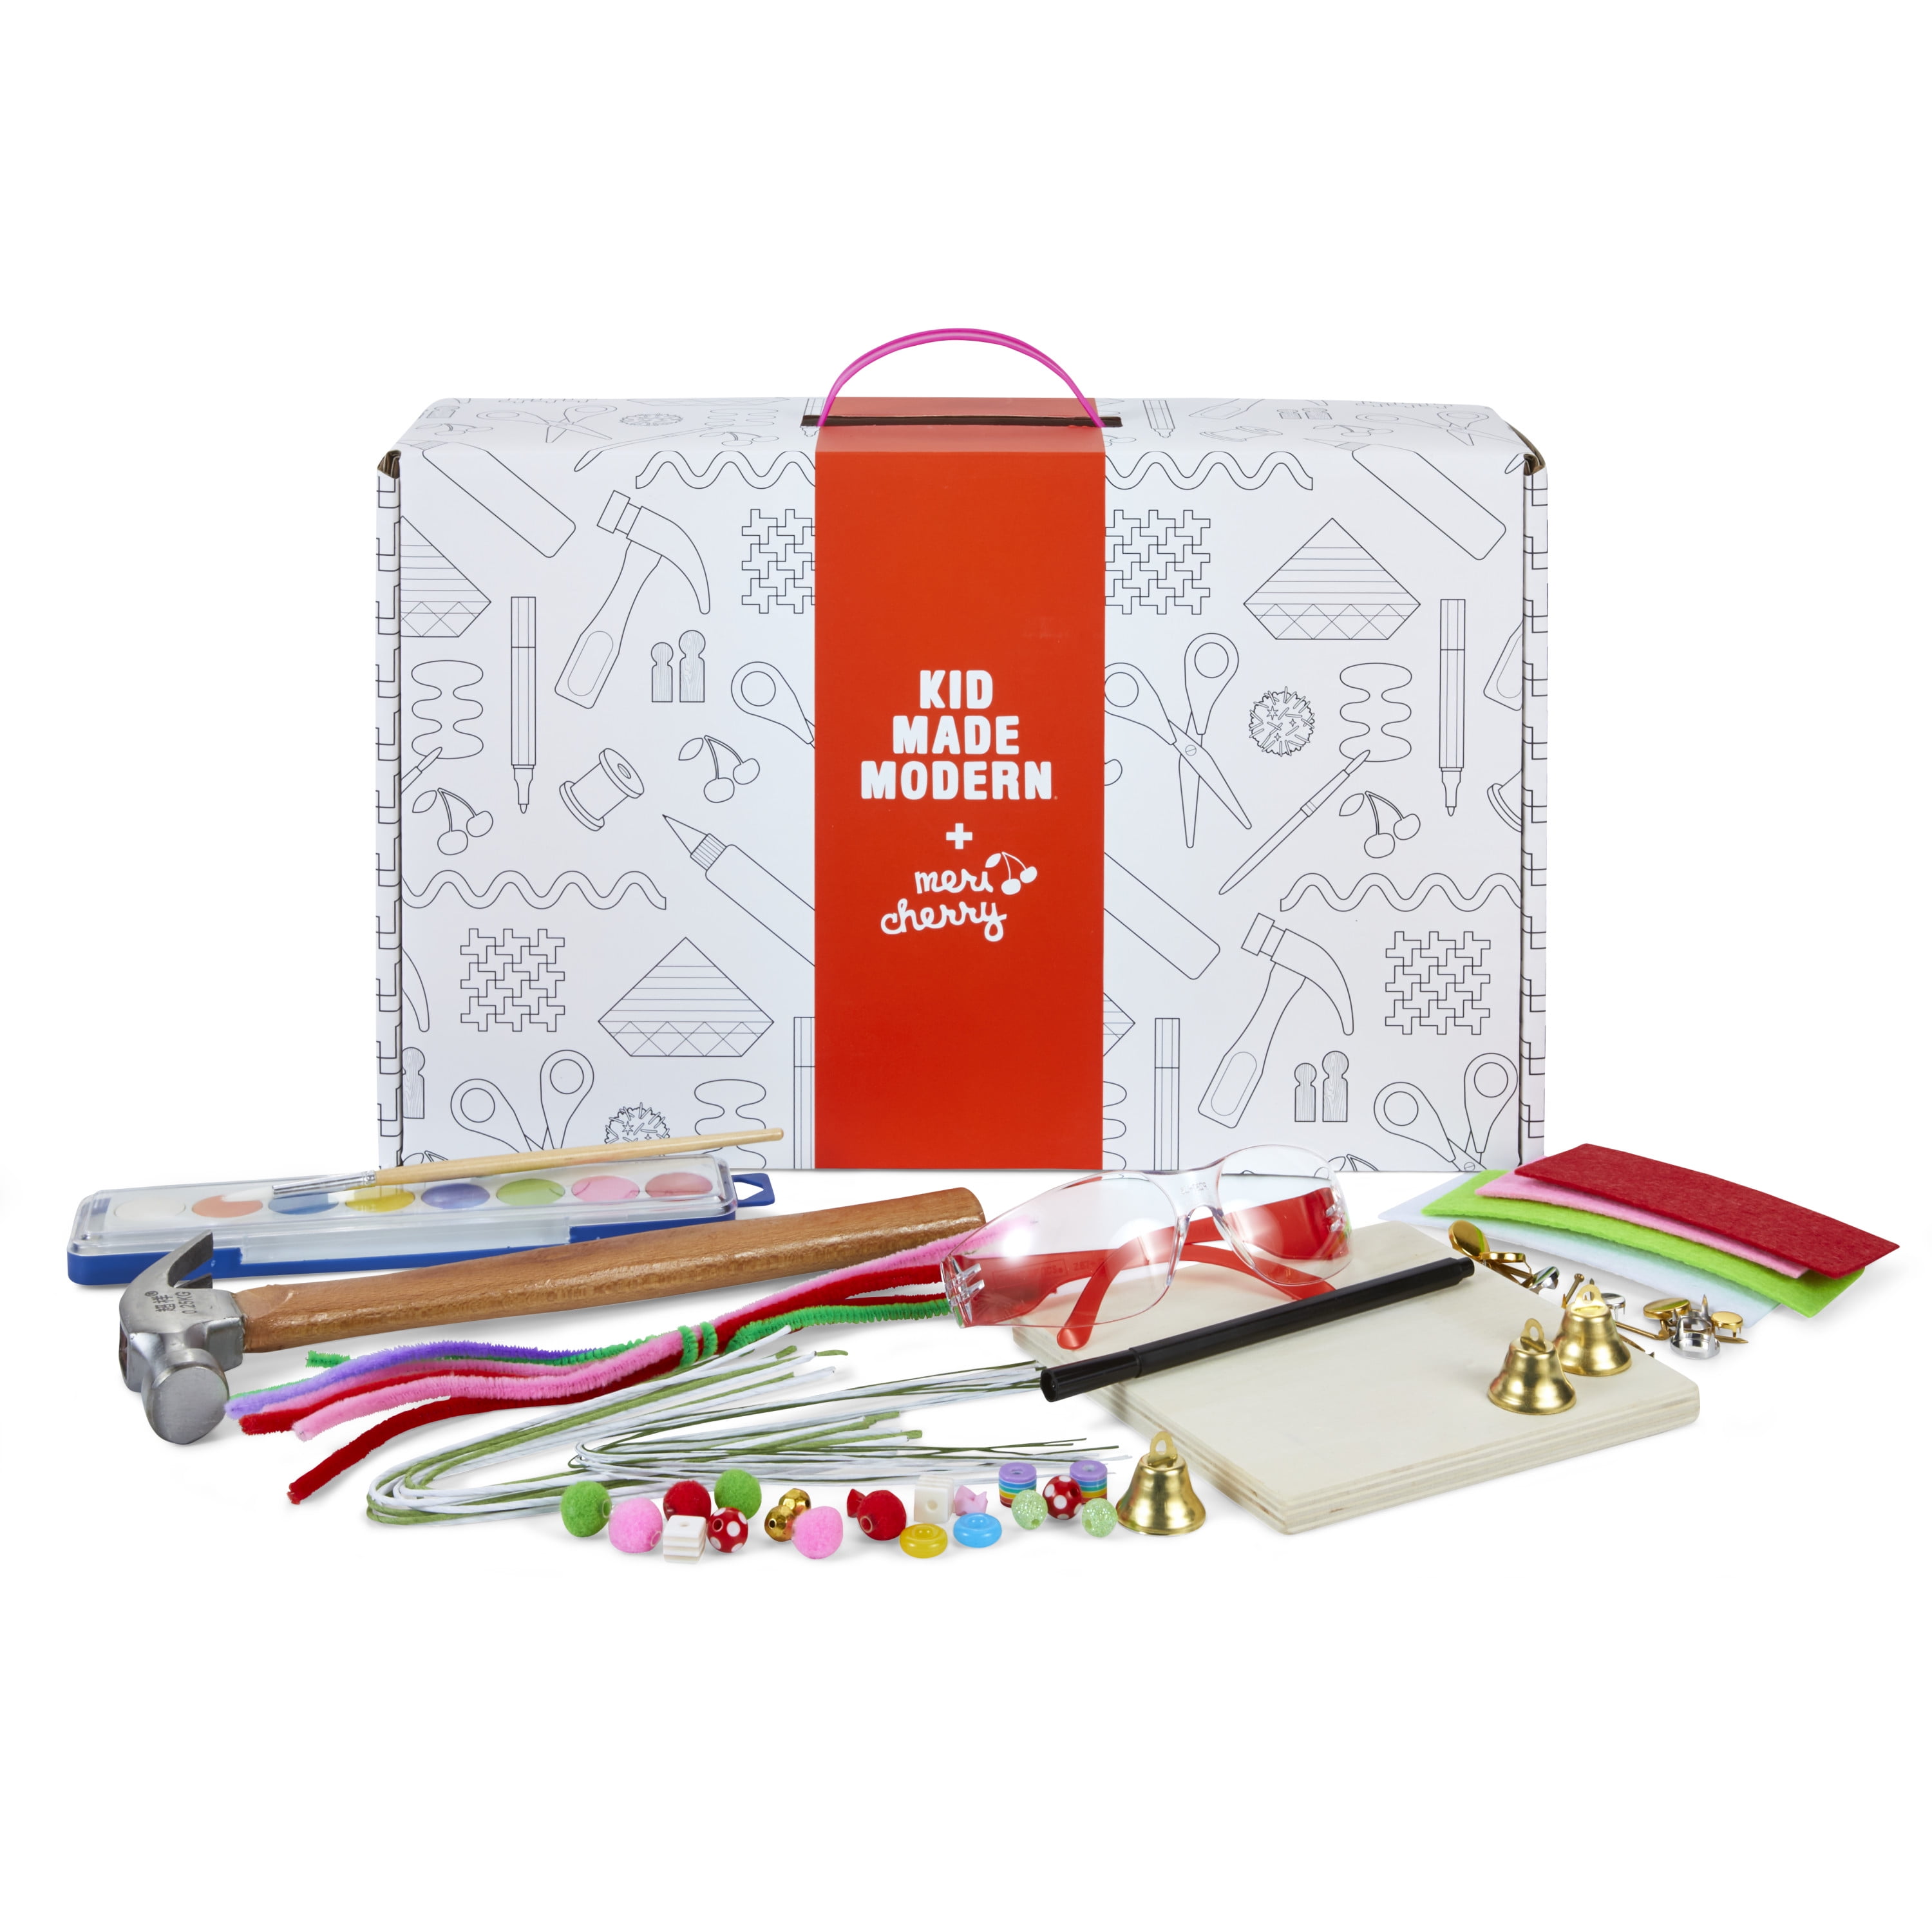  Kid Made Modern - New Years Eve Party Kit - NYE Craft Kits for  Kids Ages 8-12 : Toys & Games